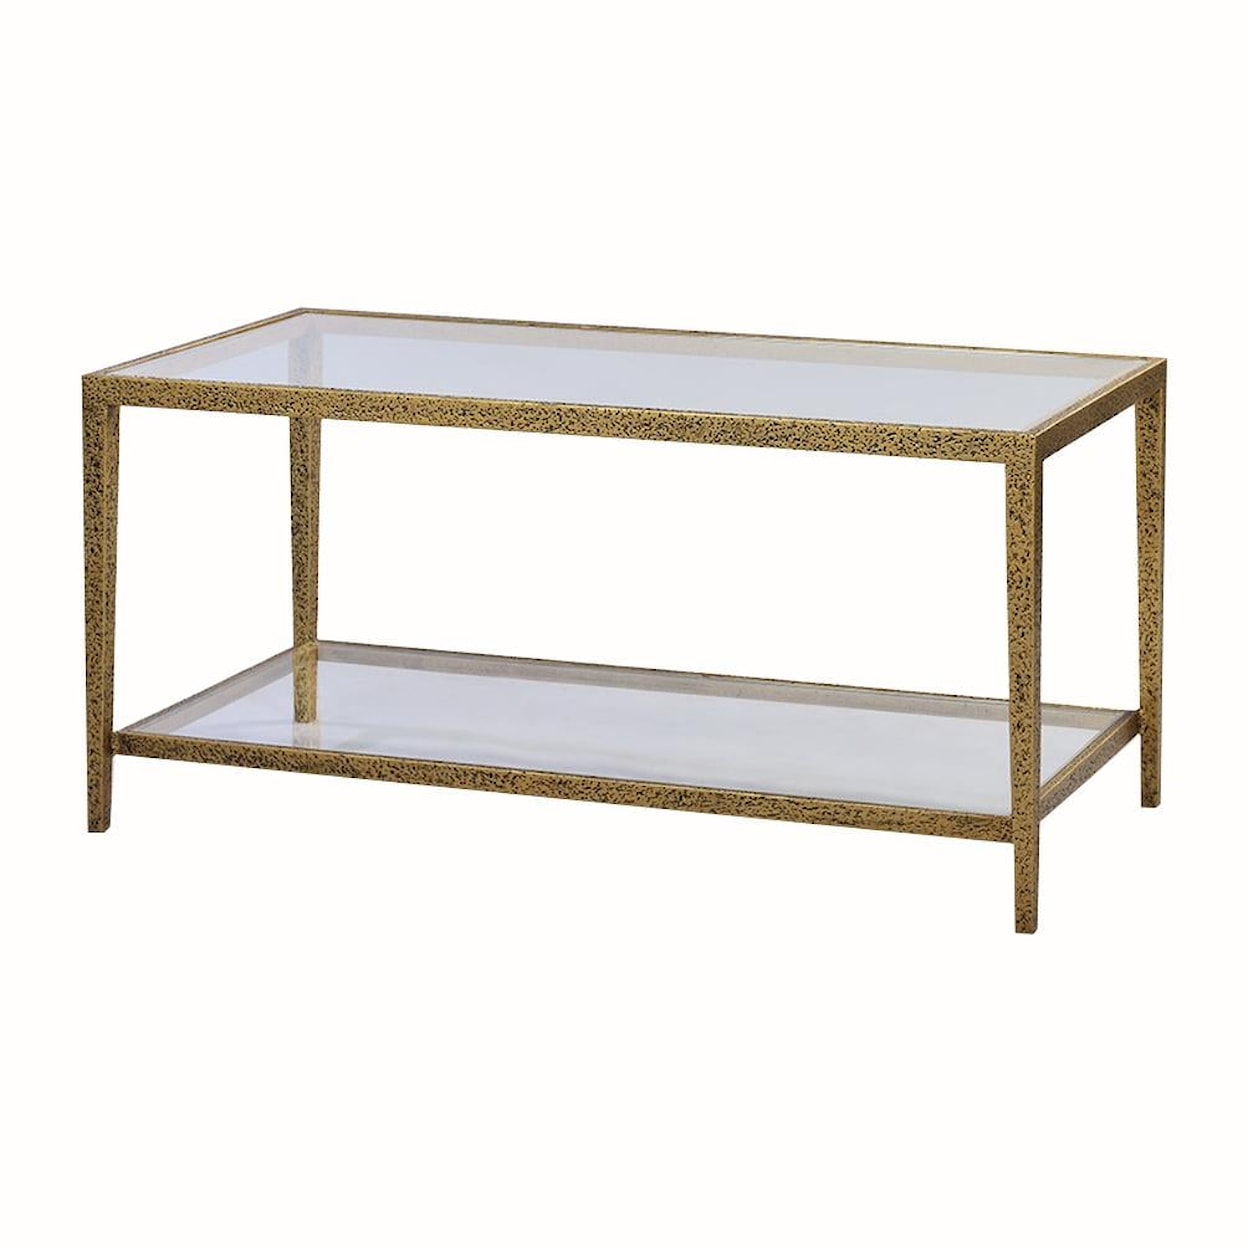 Oliver Home Furnishings Coffee Tables RECT. GLASS TOP COFFEE TABLE- GOLD LEAF